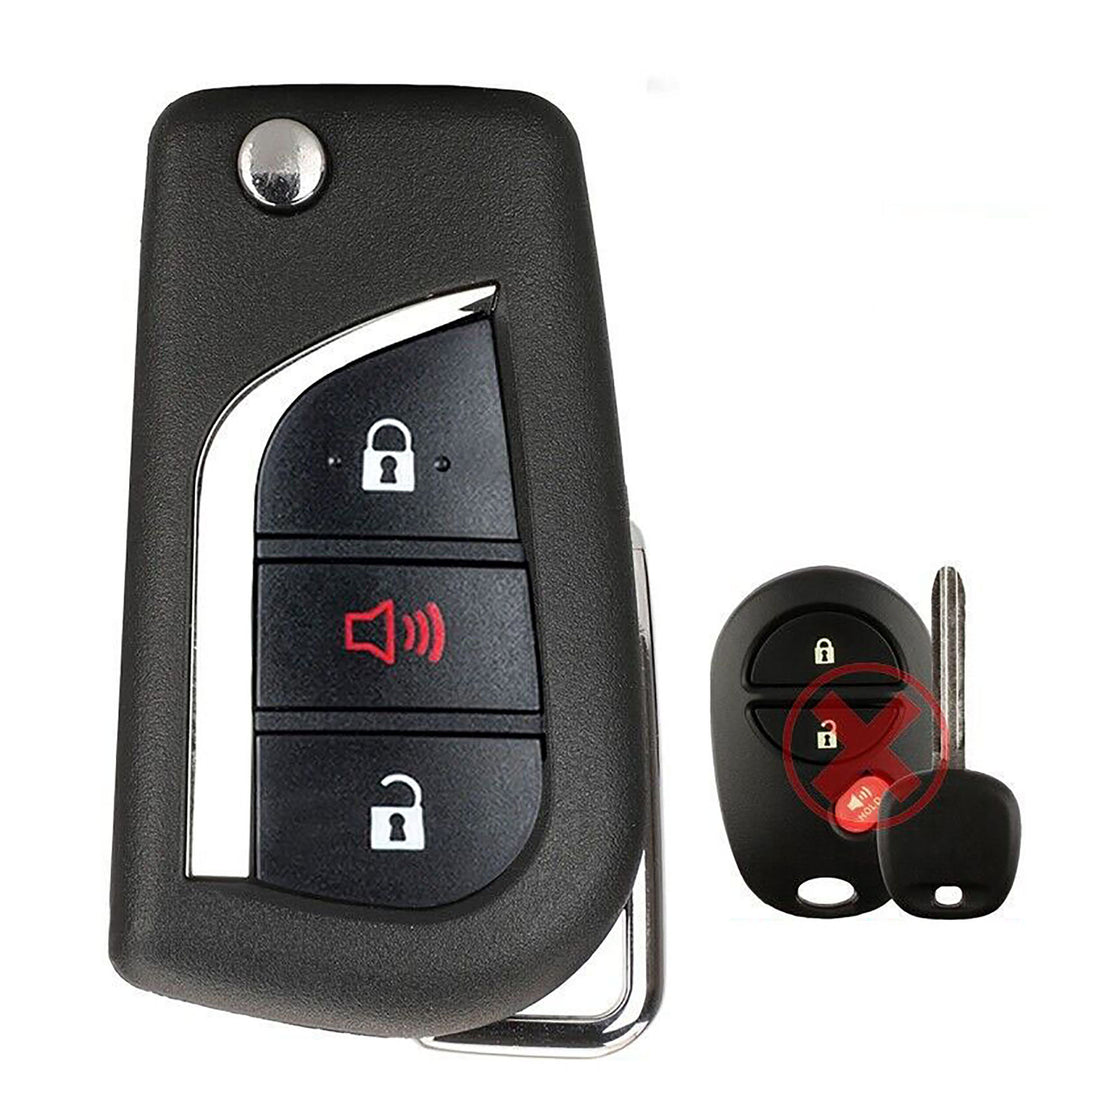 1x New Replacement Transponder Key Remote Compatible with & Fit For Toyota G chip - MPN TOY44G-PT-C-10